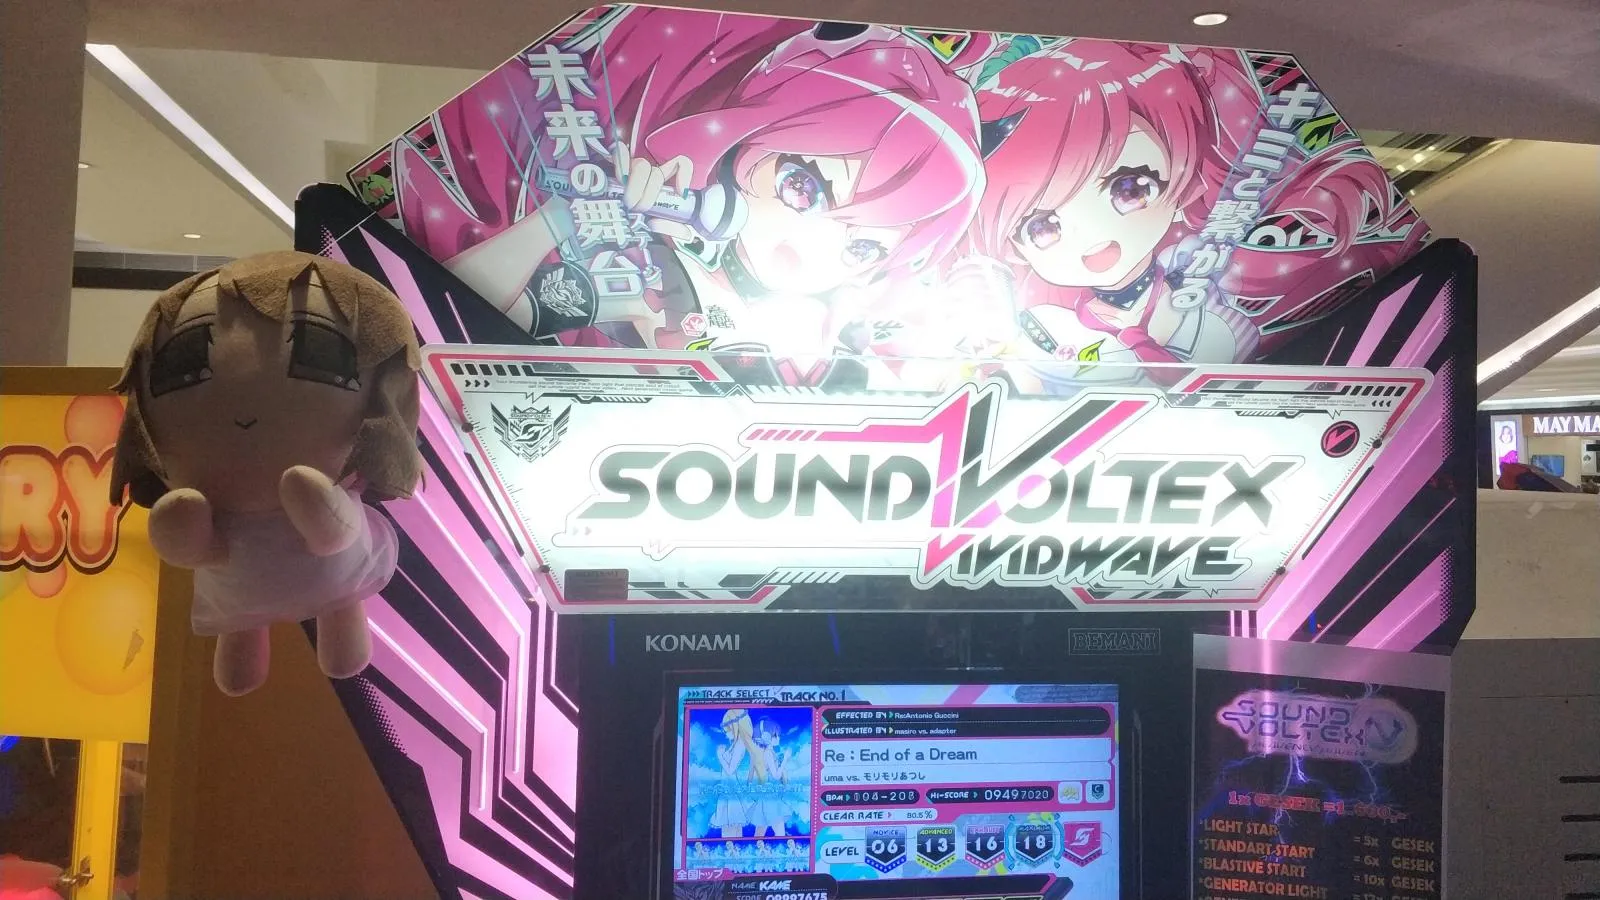 A Day in JKT48 Circus and SOUND VOLTEX Session Log #17